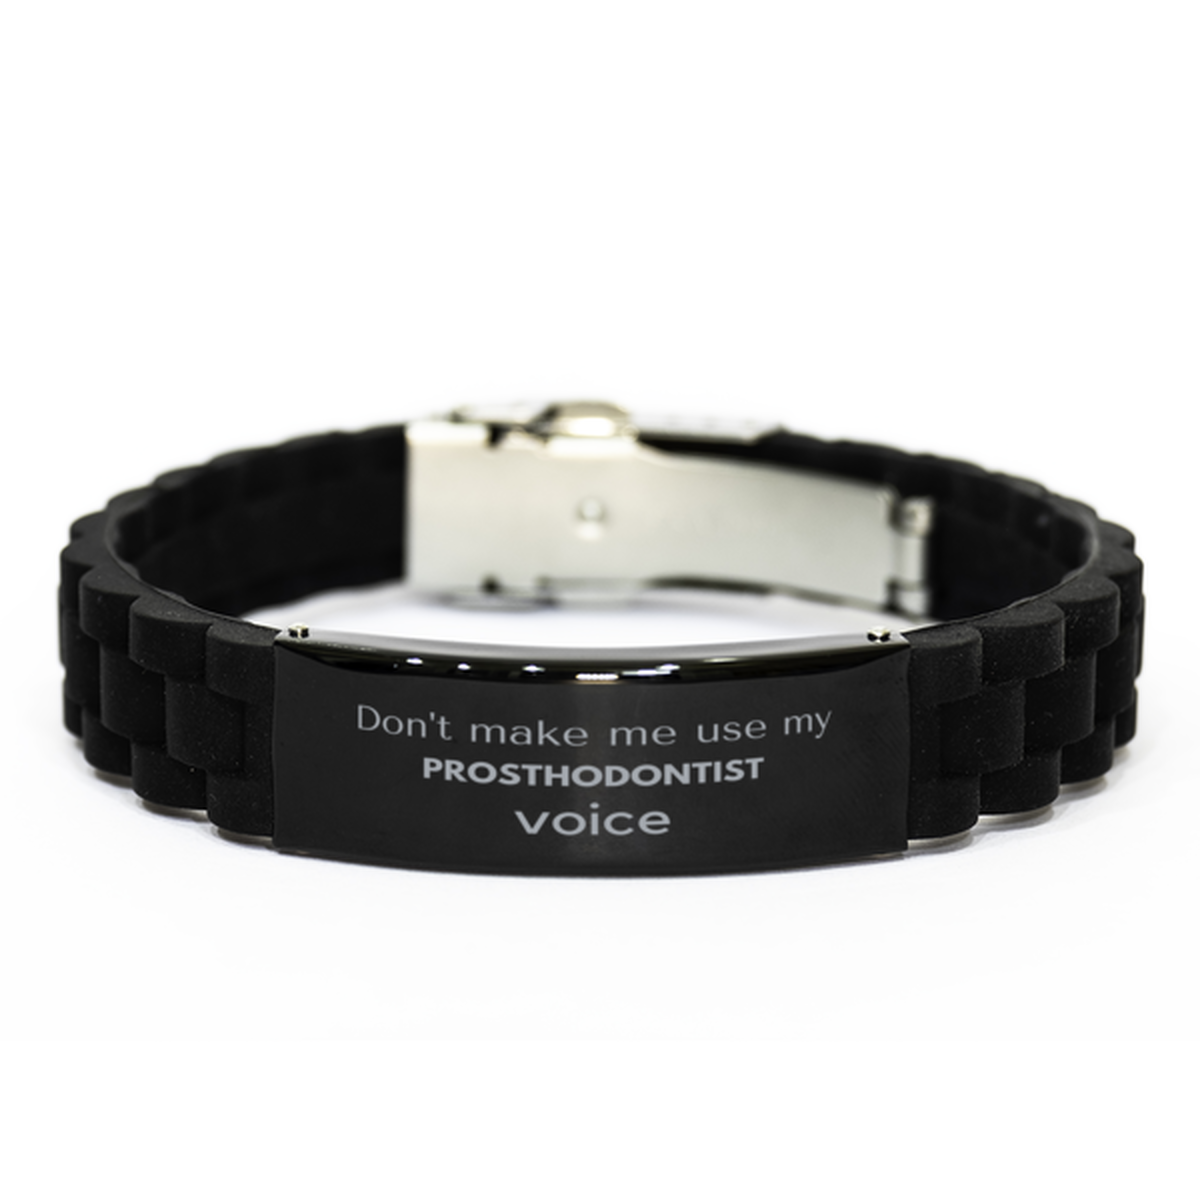 Don't make me use my Prosthodontist voice, Sarcasm Prosthodontist Gifts, Christmas Prosthodontist Black Glidelock Clasp Bracelet Birthday Unique Gifts For Prosthodontist Coworkers, Men, Women, Colleague, Friends